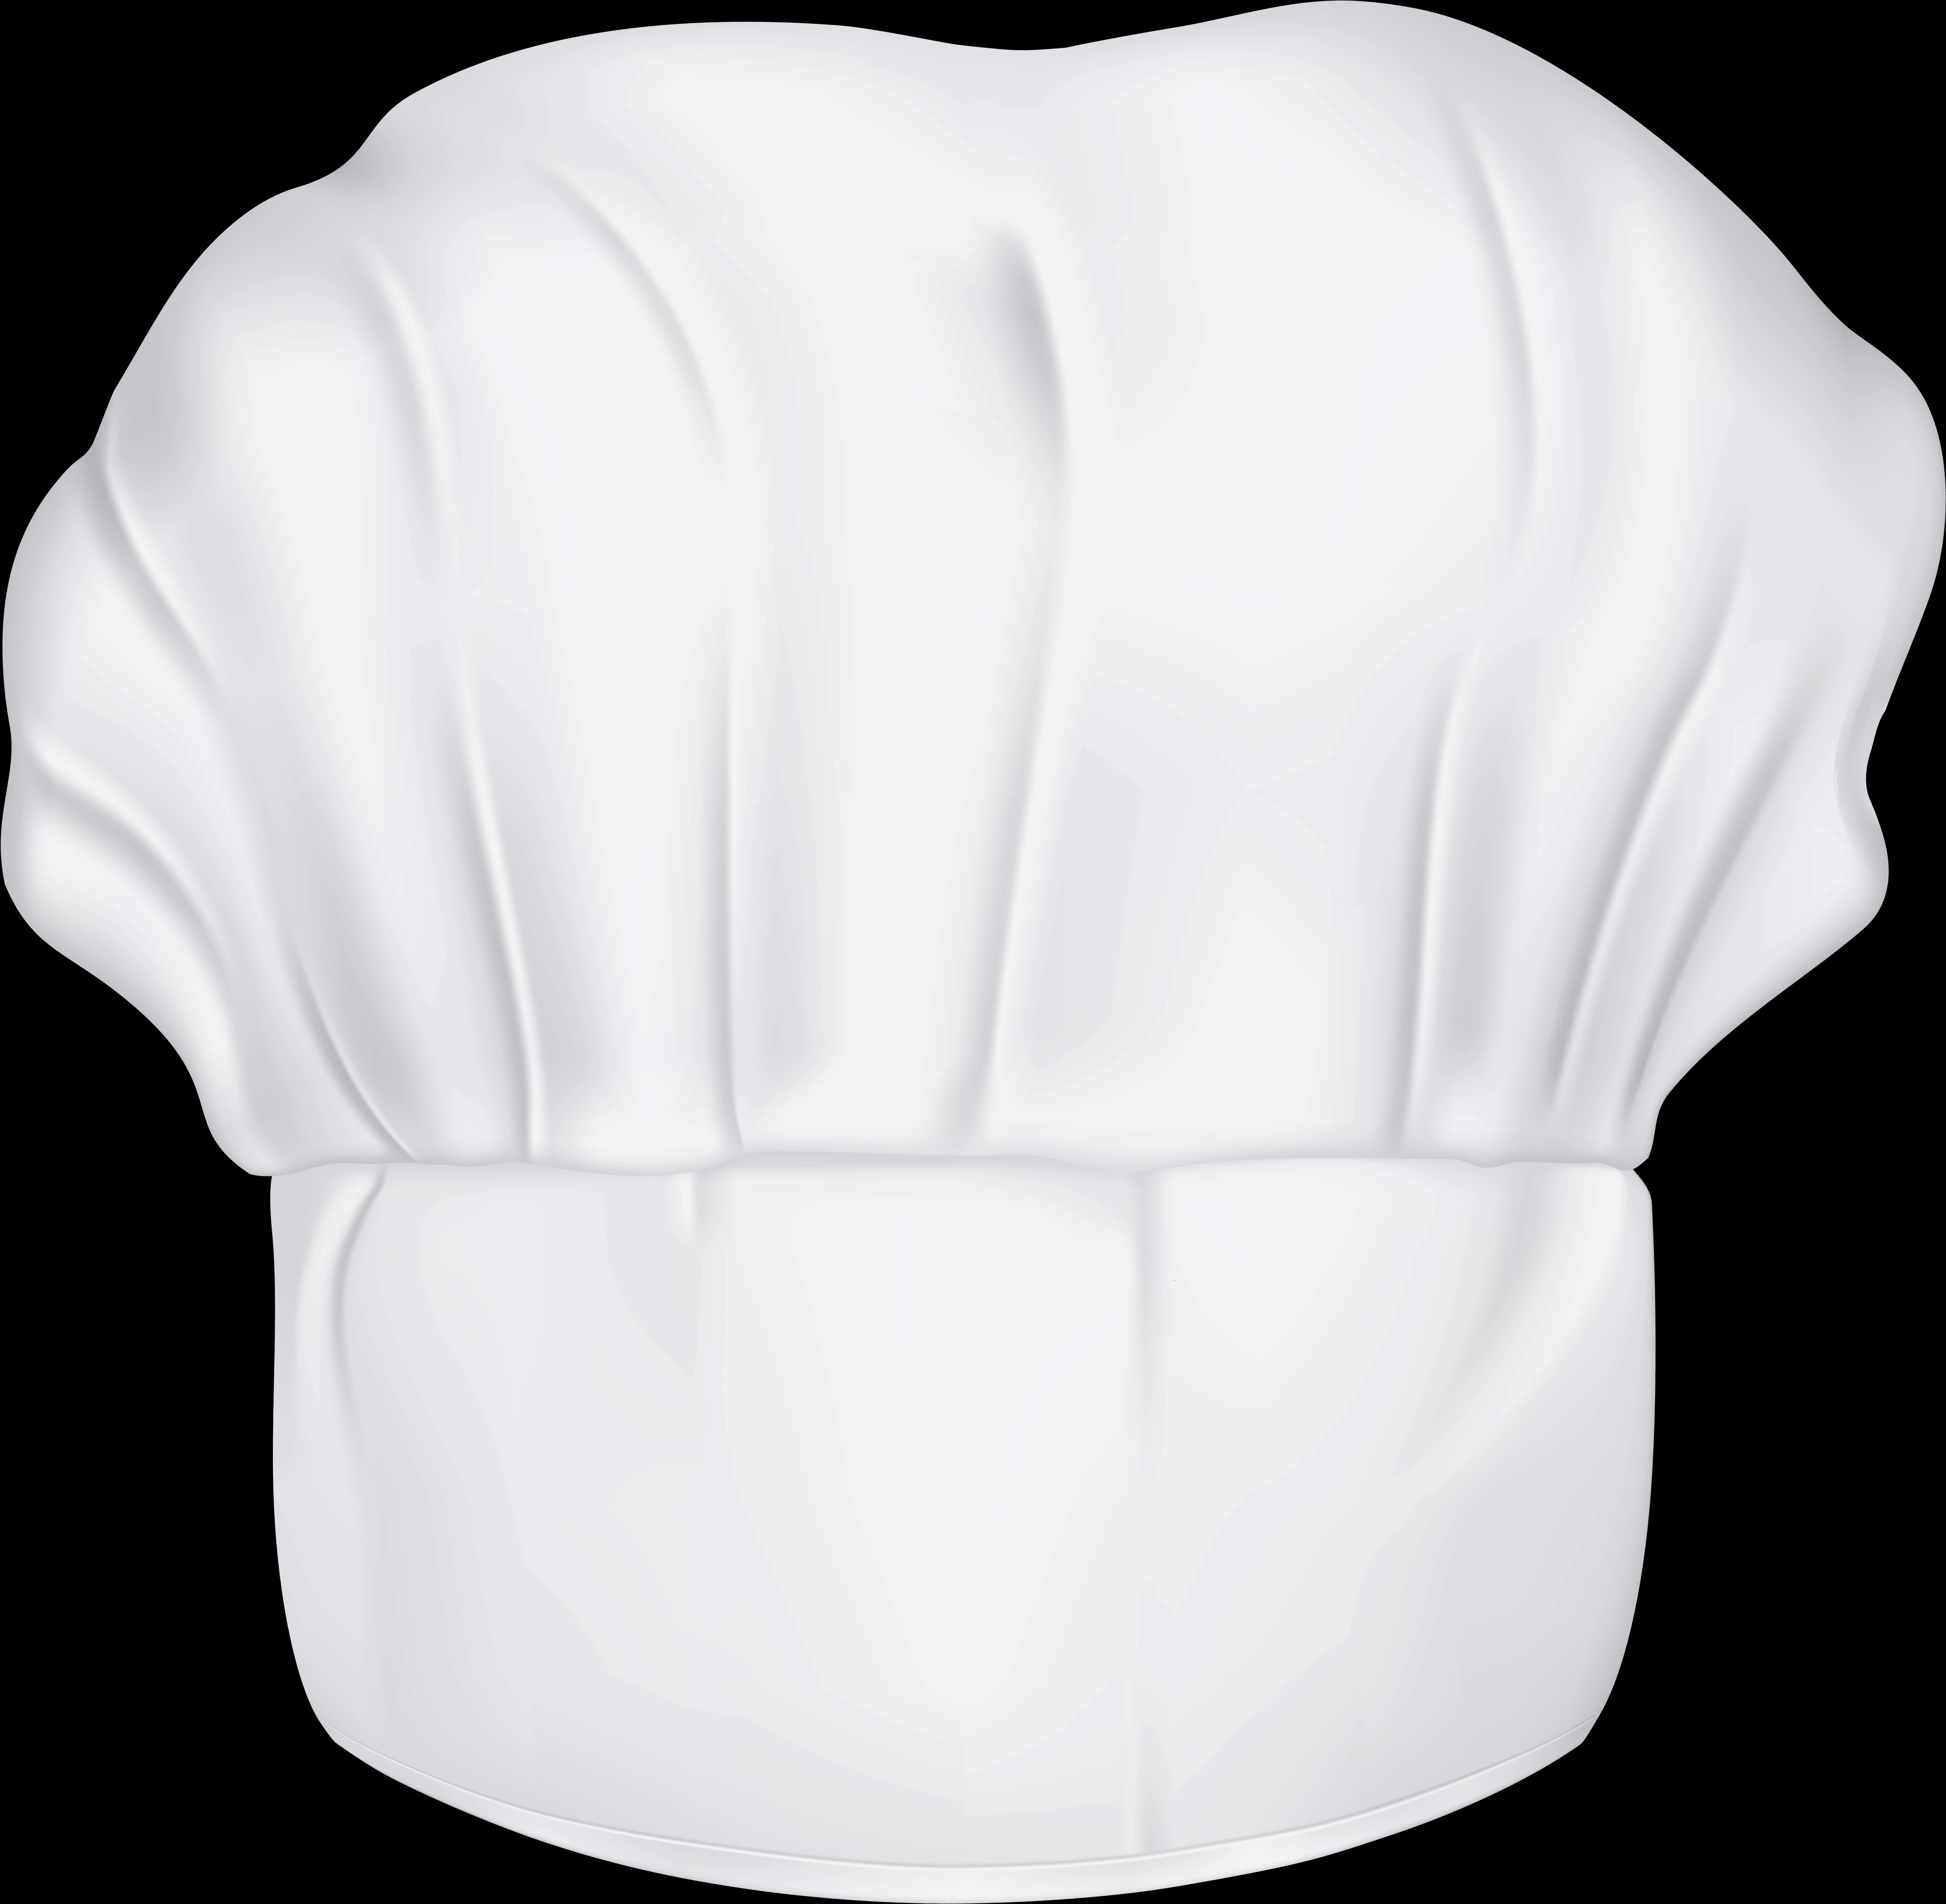 A White Chef Hat On A Black Background